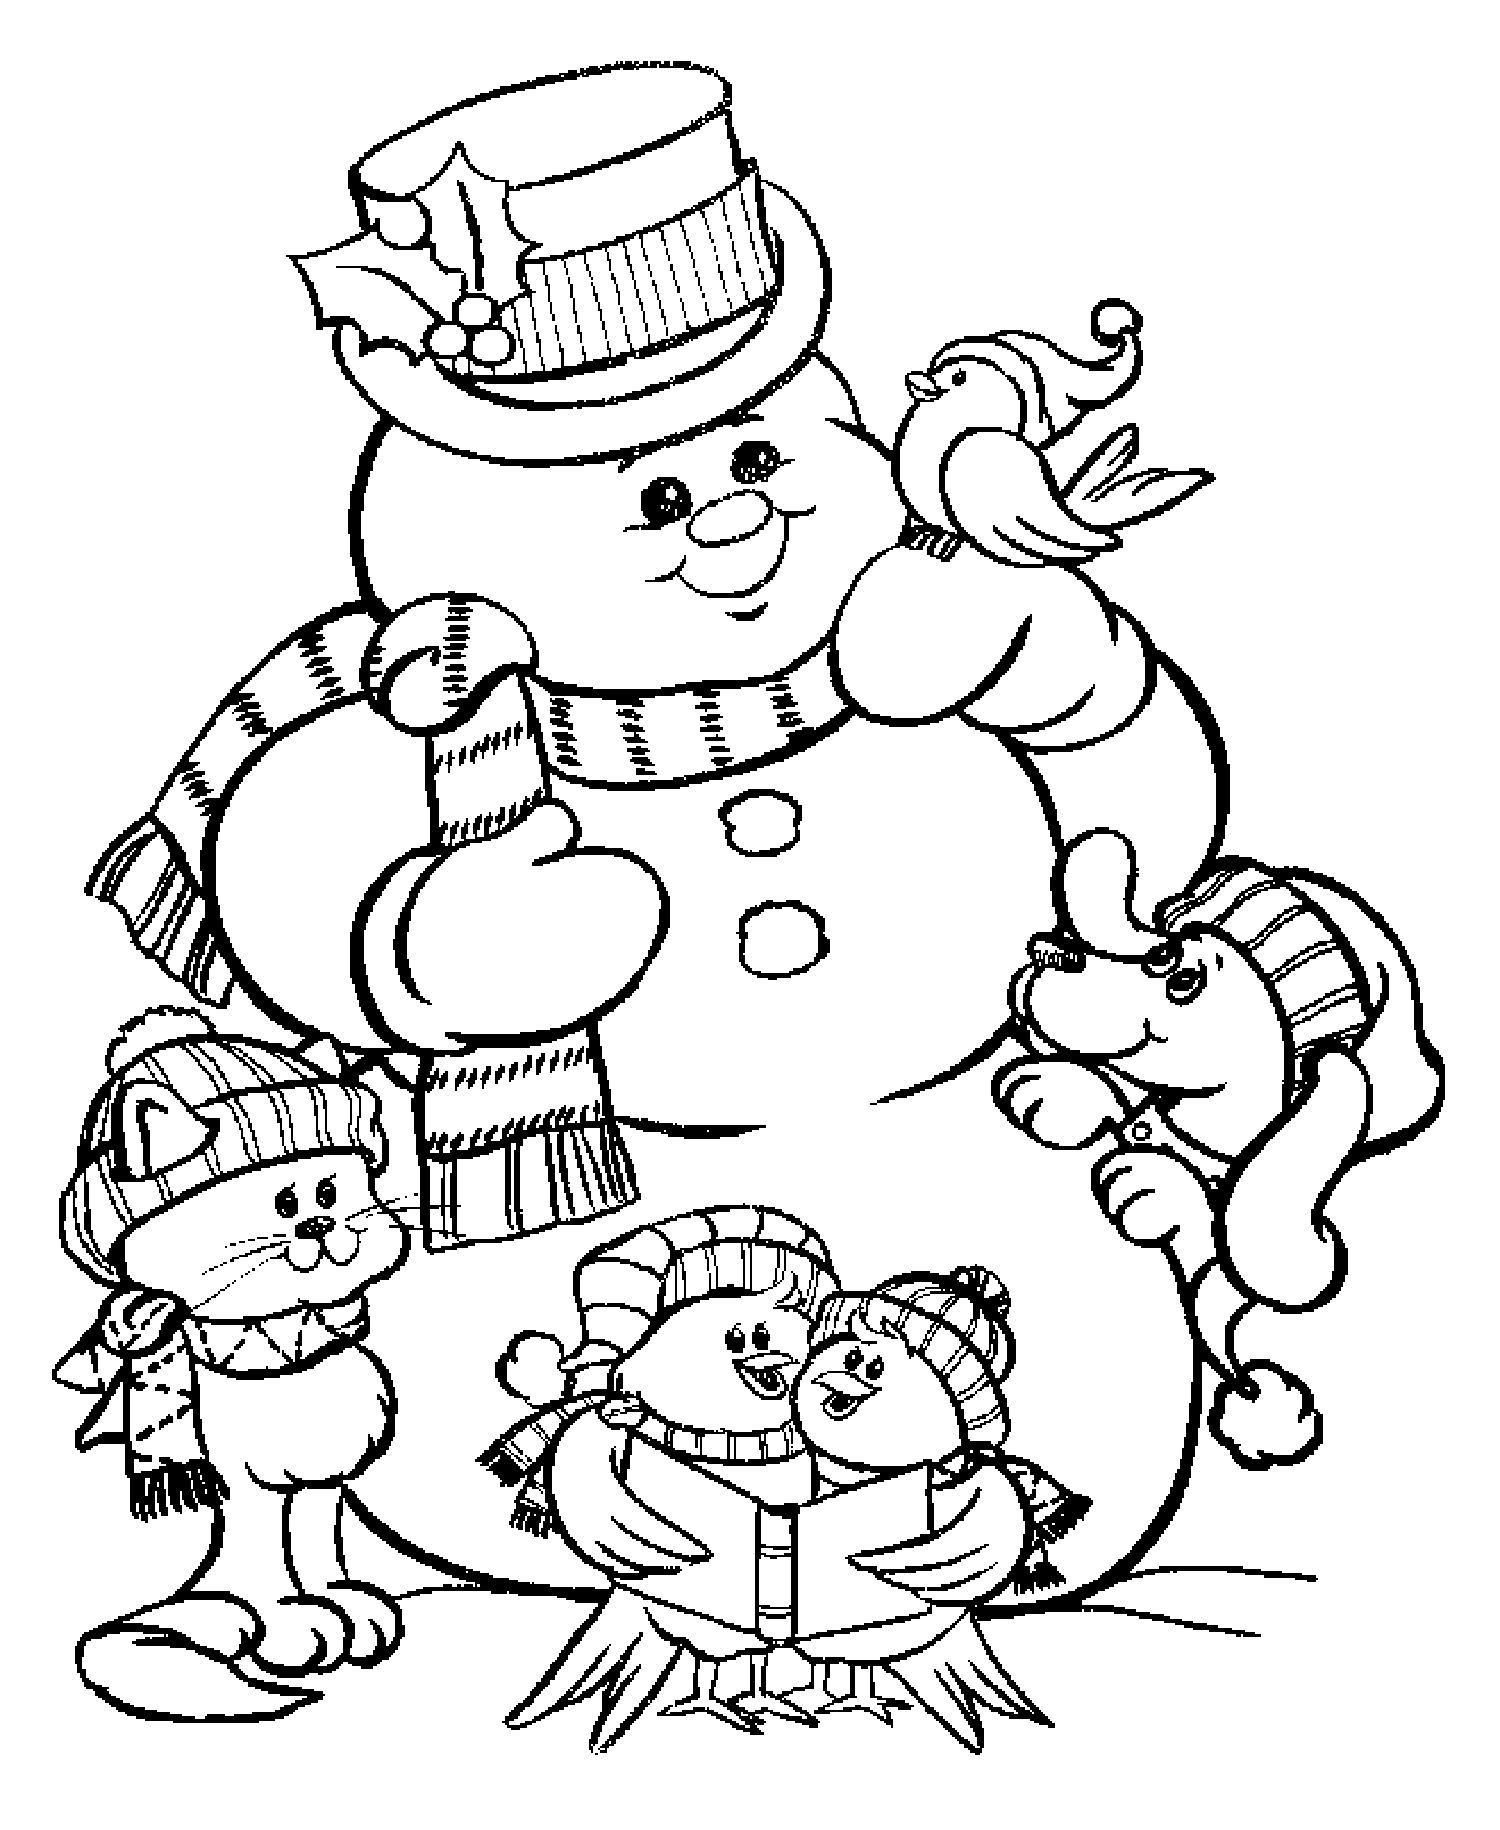 Coloring Pages For Kids Christmas, Coloring Pages: Christmas Coloring